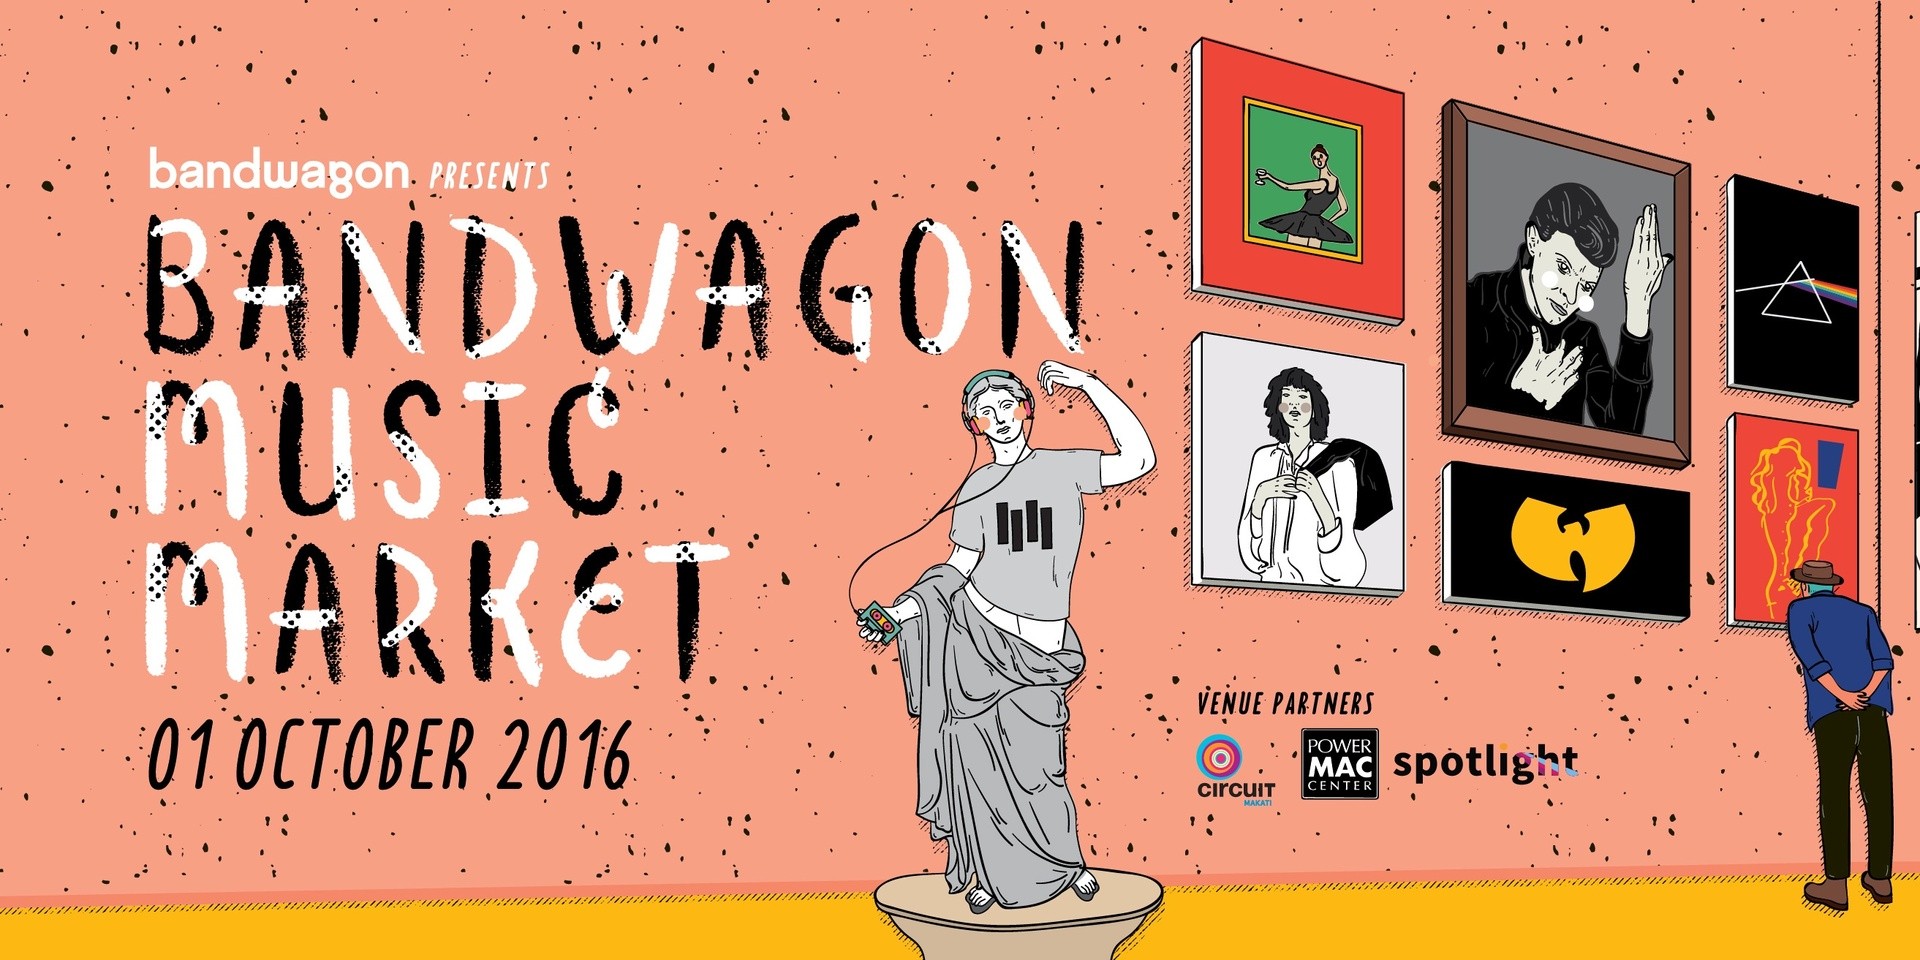 The Guide to Bandwagon Music Market 2016